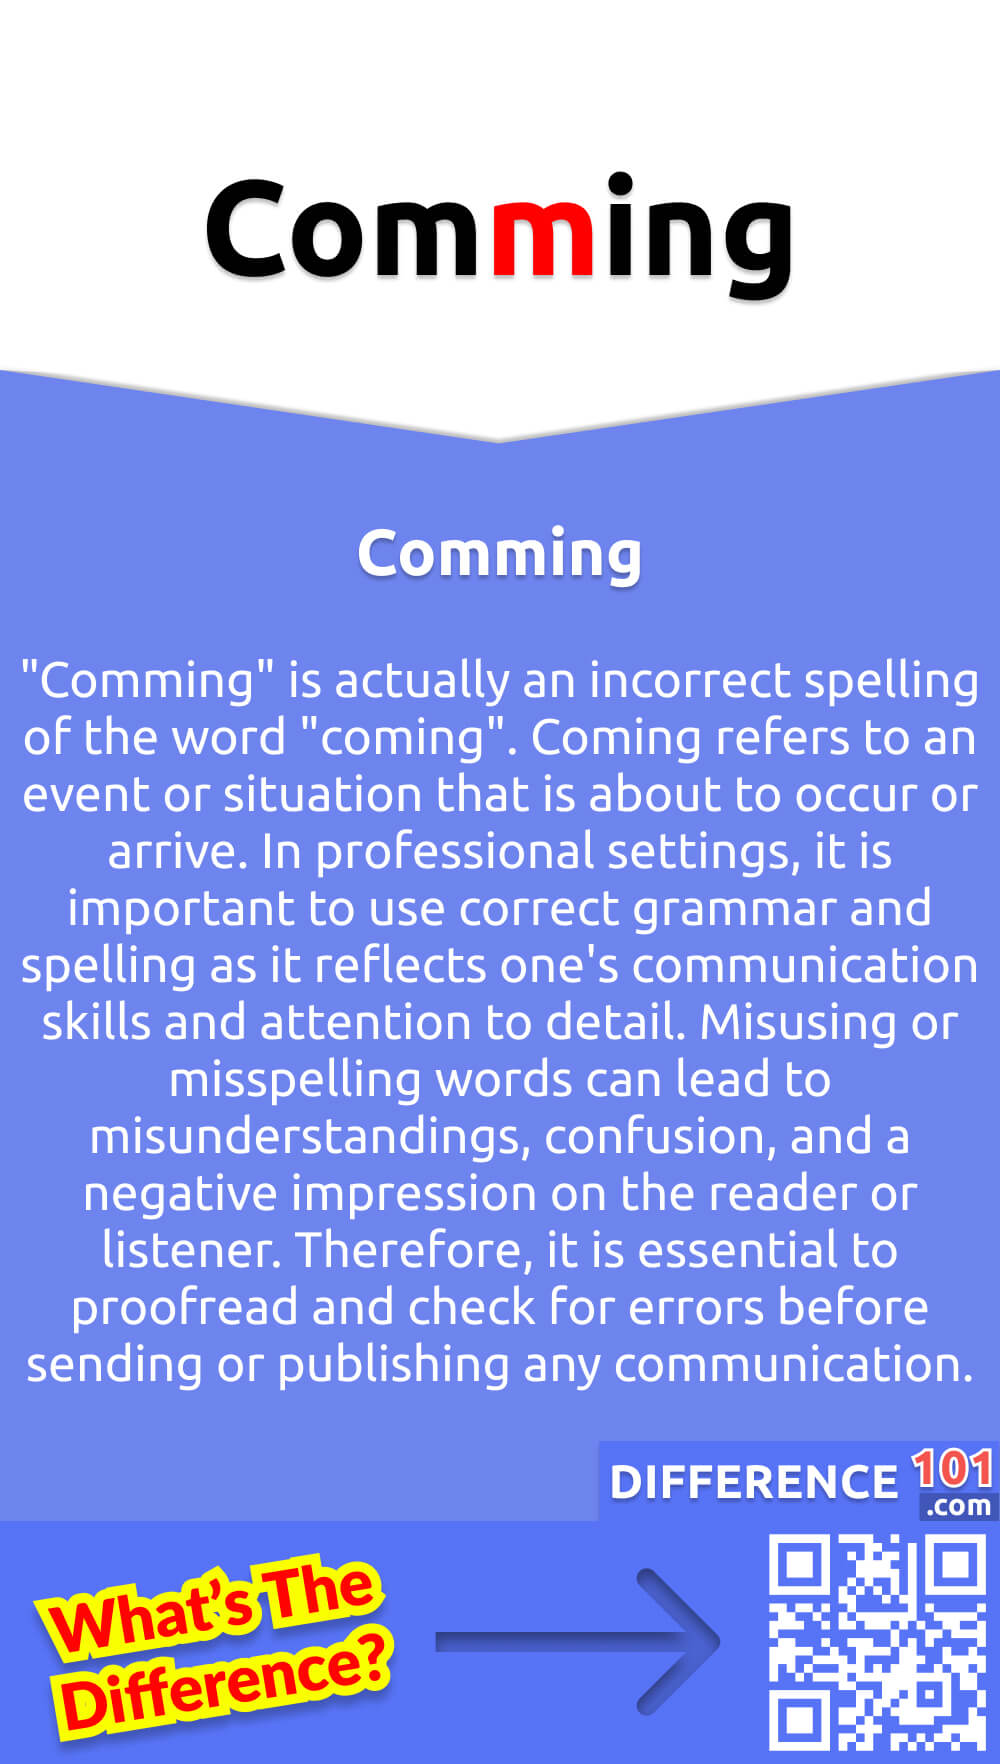 What Is Comming? "Comming" is actually an incorrect spelling of the word "coming". Coming refers to an event or situation that is about to occur or arrive. In professional settings, it is important to use correct grammar and spelling as it reflects one's communication skills and attention to detail. Misusing or misspelling words can lead to misunderstandings, confusion, and a negative impression on the reader or listener. Therefore, it is essential to proofread and check for errors before sending or publishing any communication. In summary, while "comming" may seem like a small mistake, it can make a significant impact on one's professionalism and credibility.